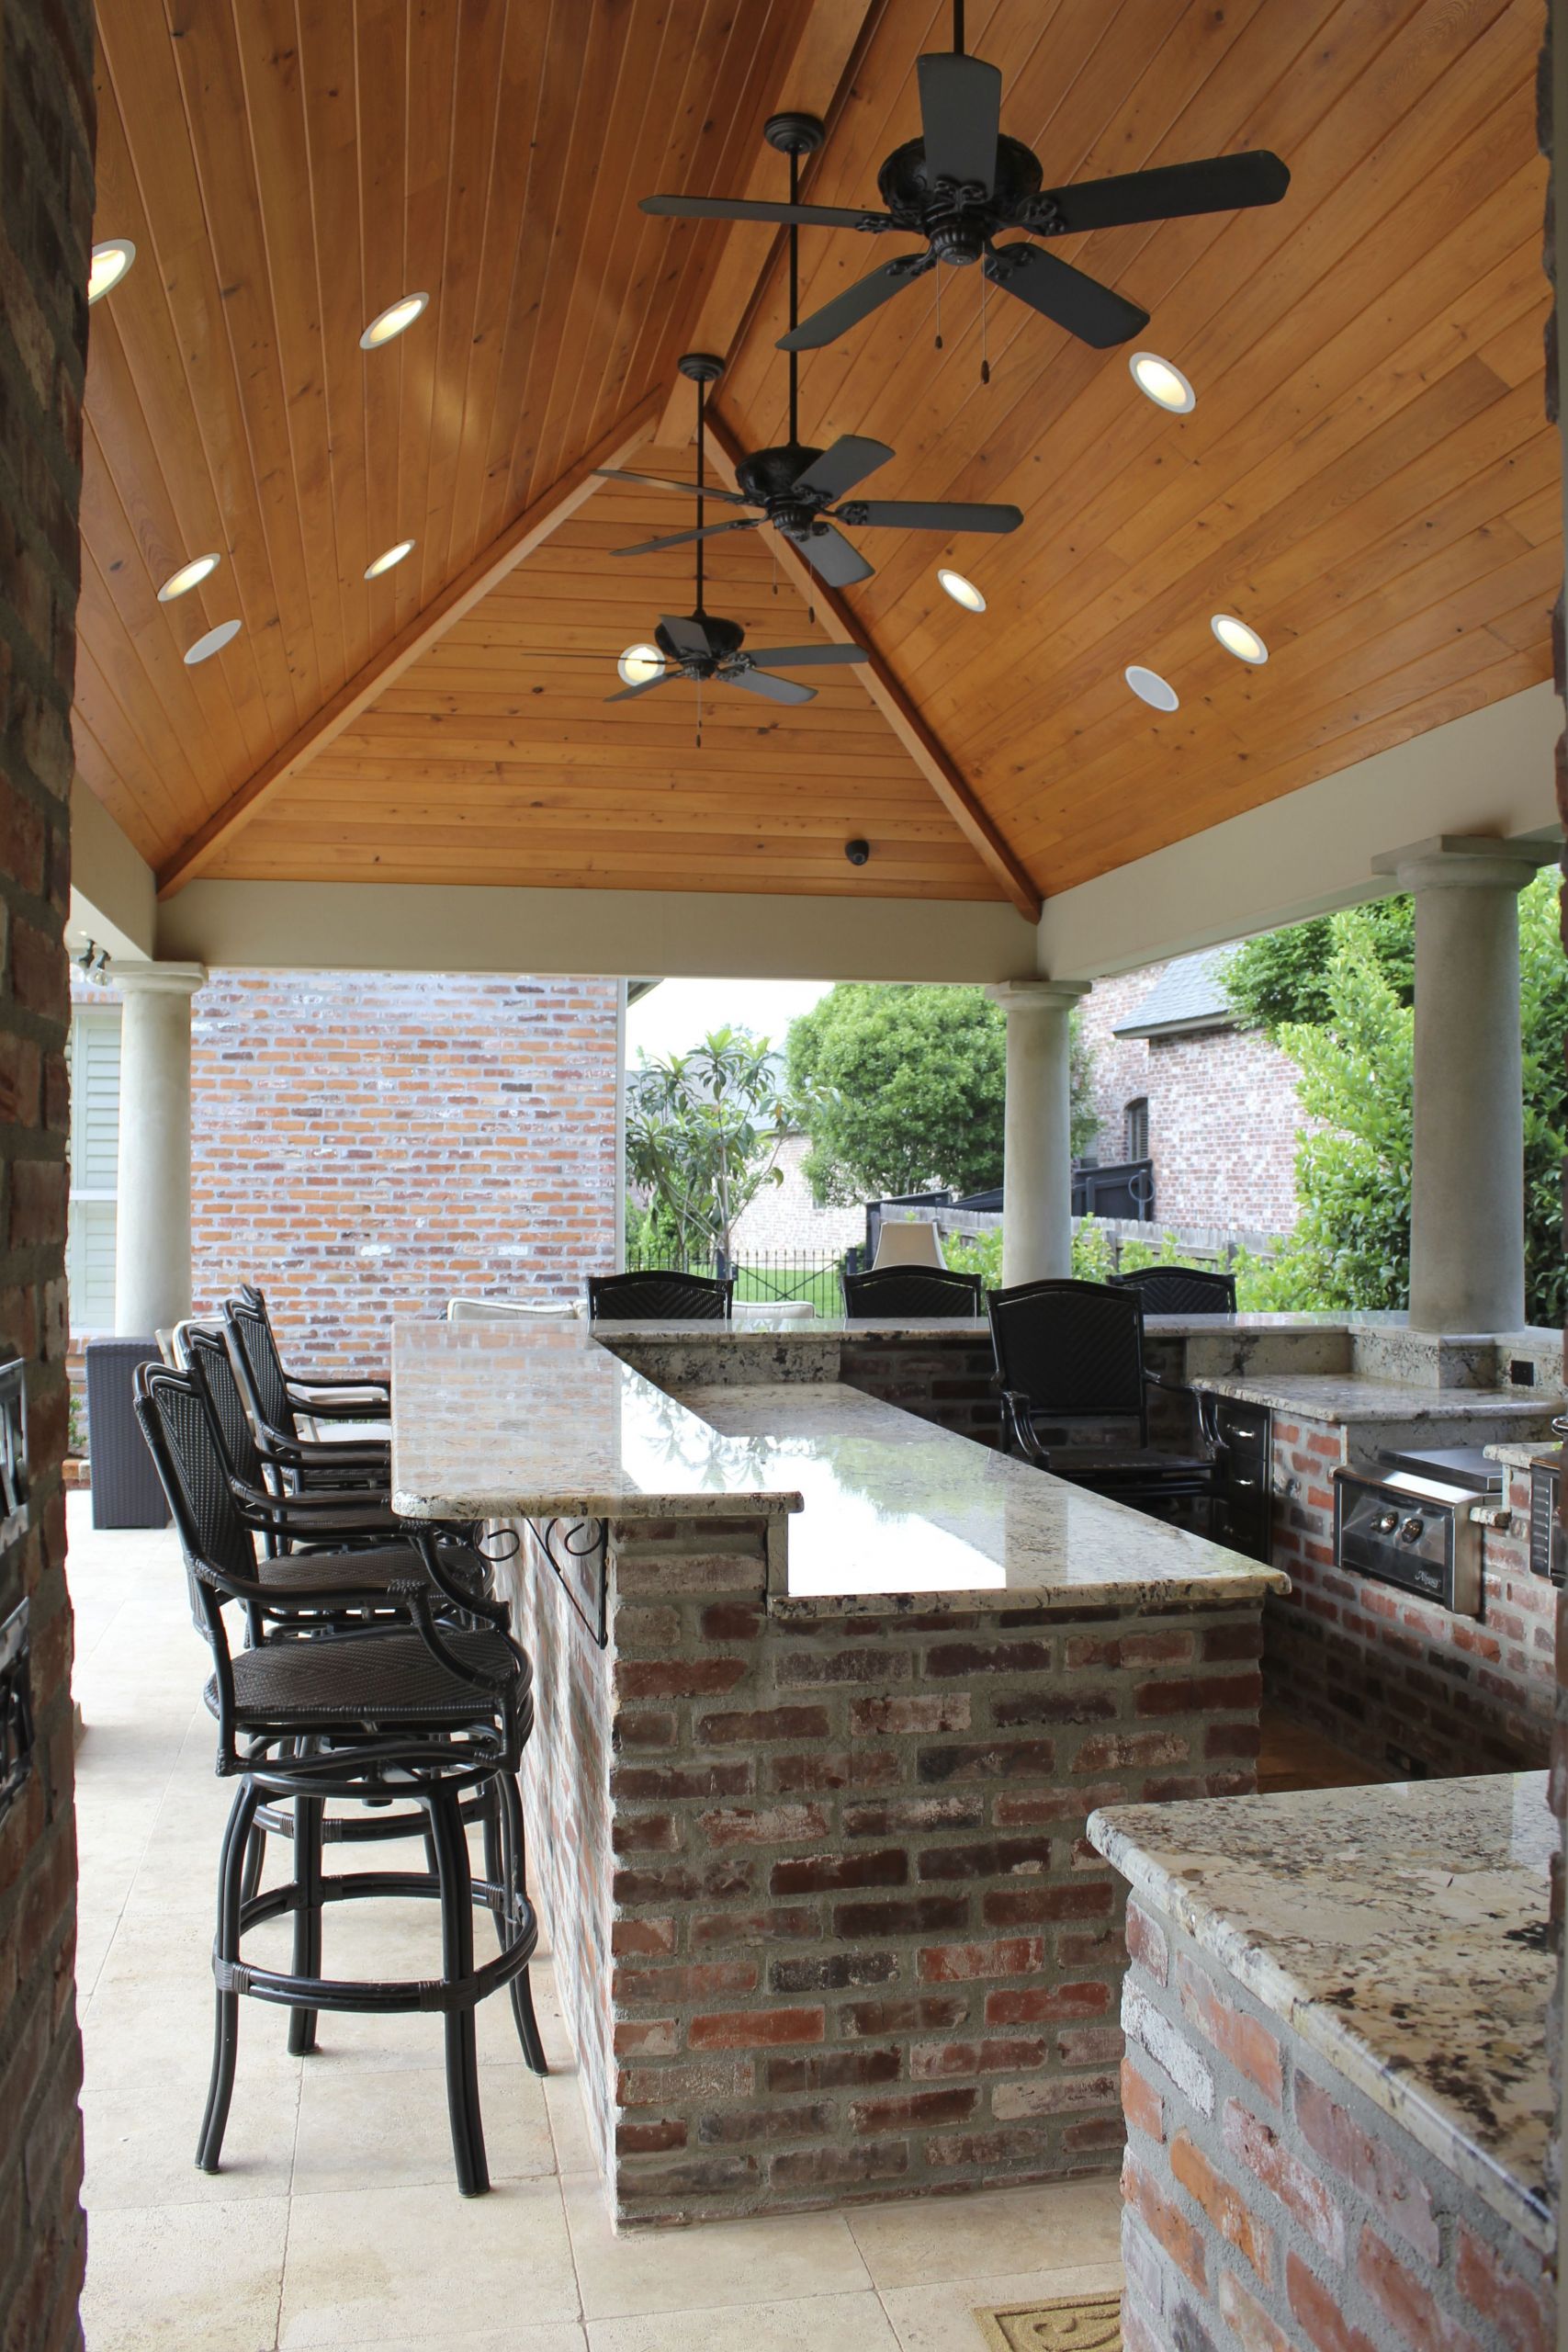 Bbq Guys Outdoor Kitchen
 fans and bar and counter space ke